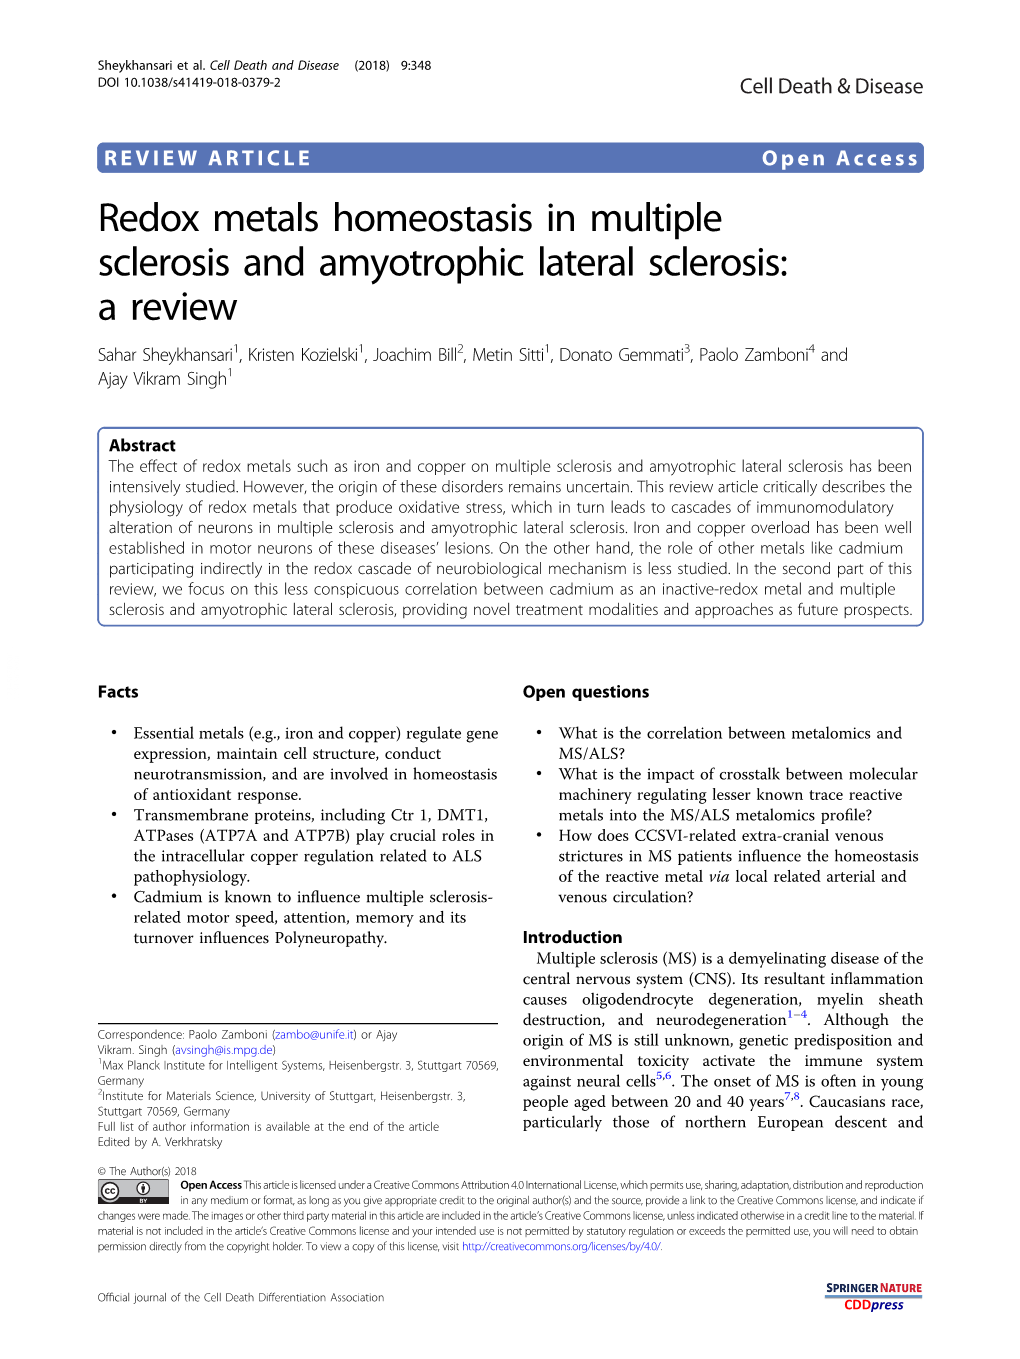 Redox Metals Homeostasis in Multiple Sclerosis and Amyotrophic Lateral